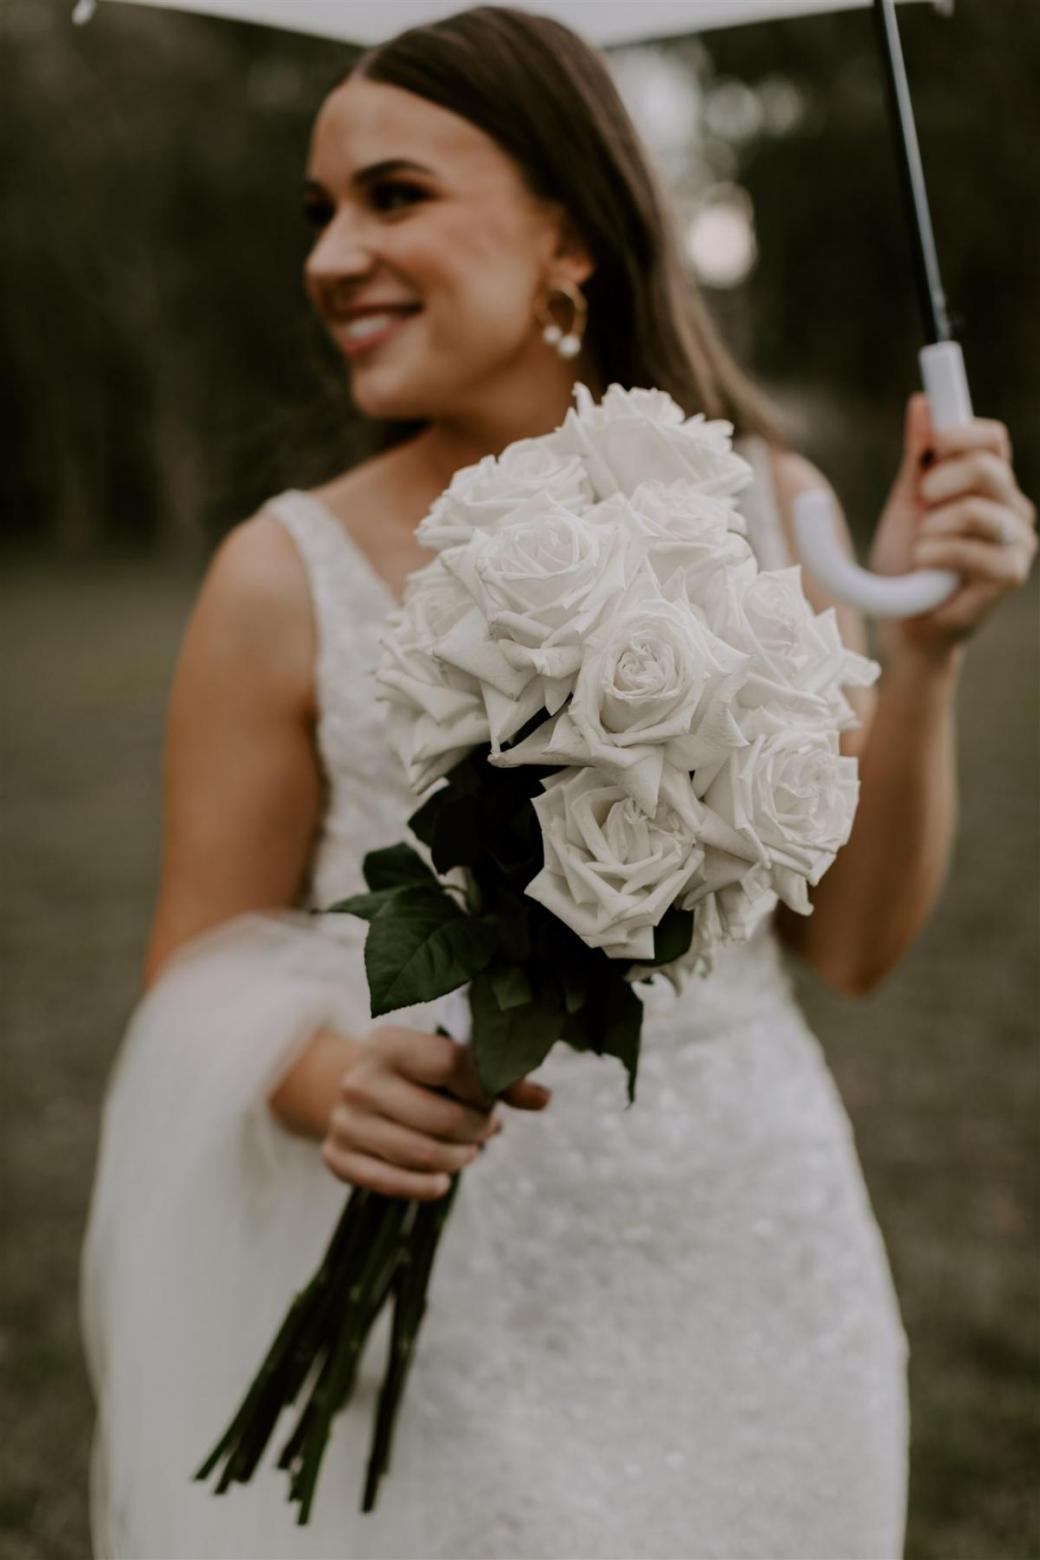 KWH bride Jemma holding her bridal bouquet, featuring white roses